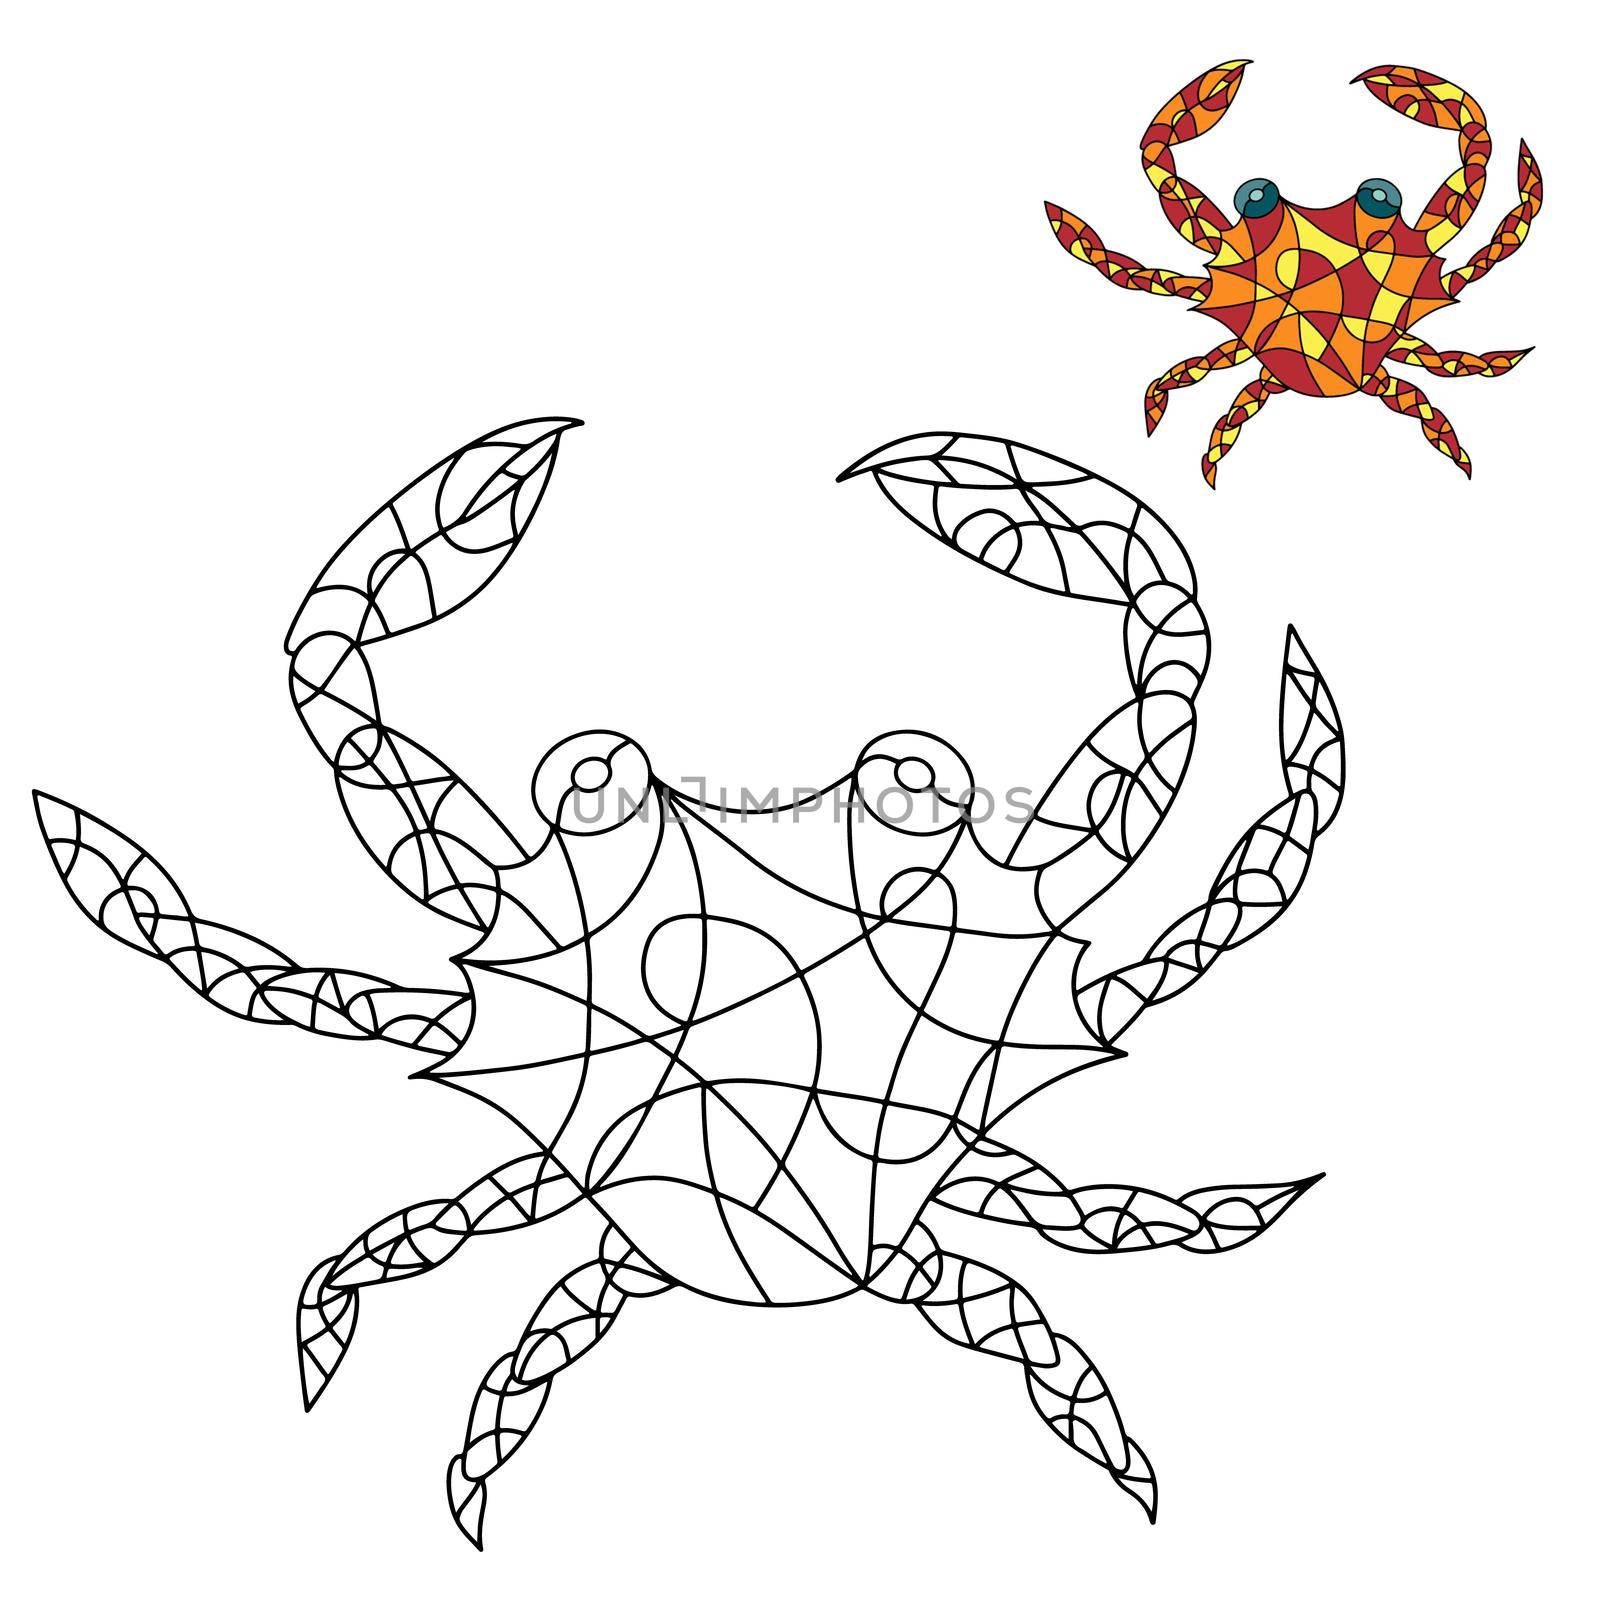 Black and White and Colored Illustration in stained glass style with abstract Crab. Image for Coloring Book, Coloring Page, Print, Batik and Window.